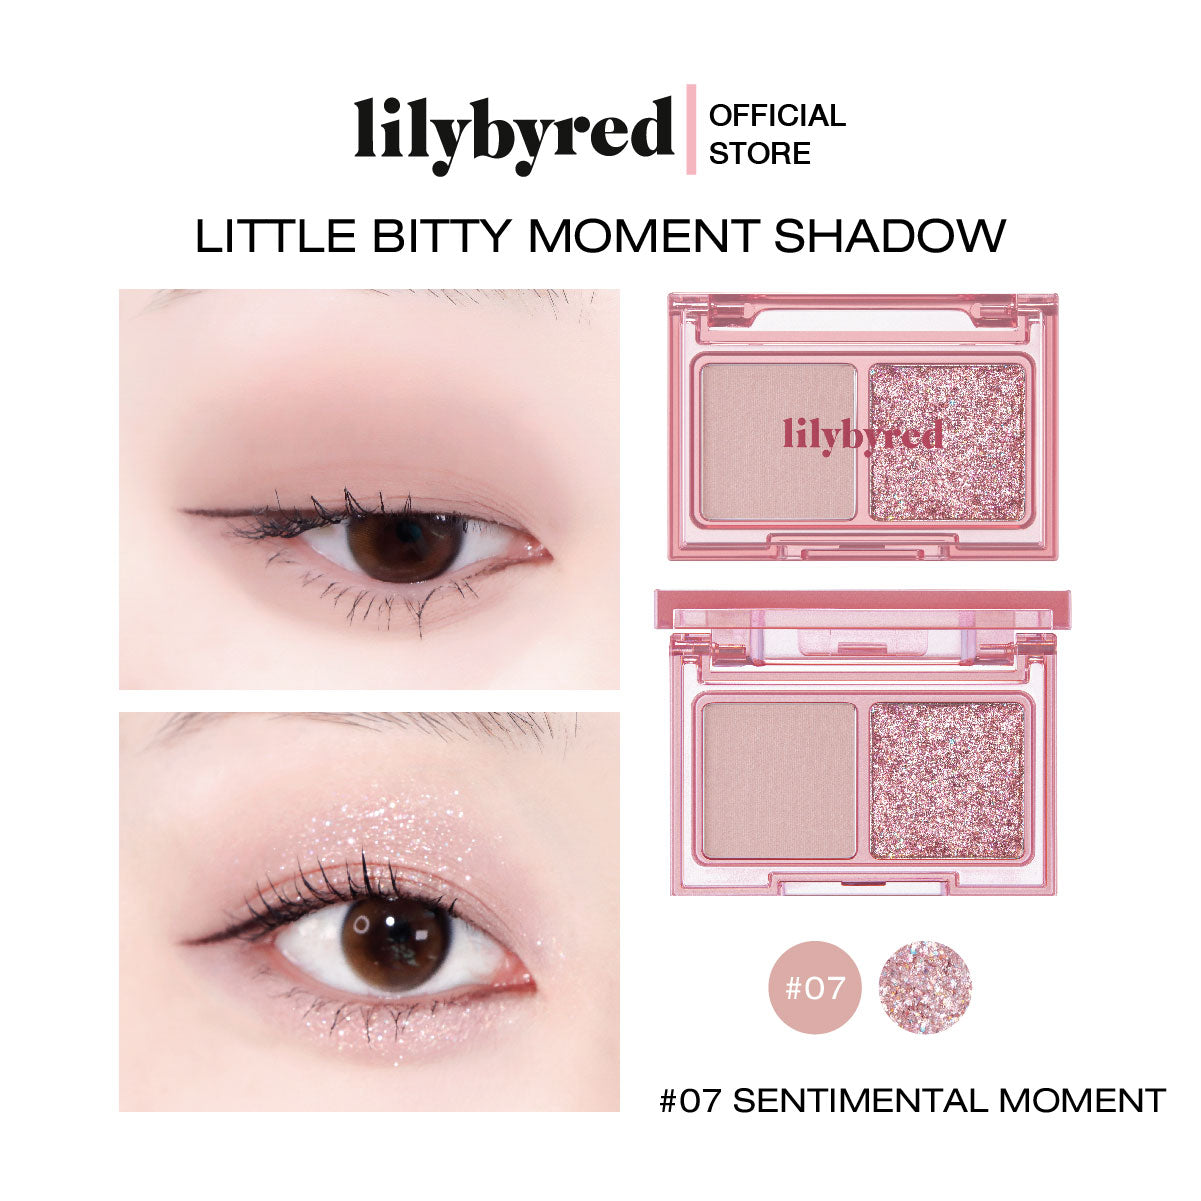 Lilybyred Little Bitty Moment Shadow